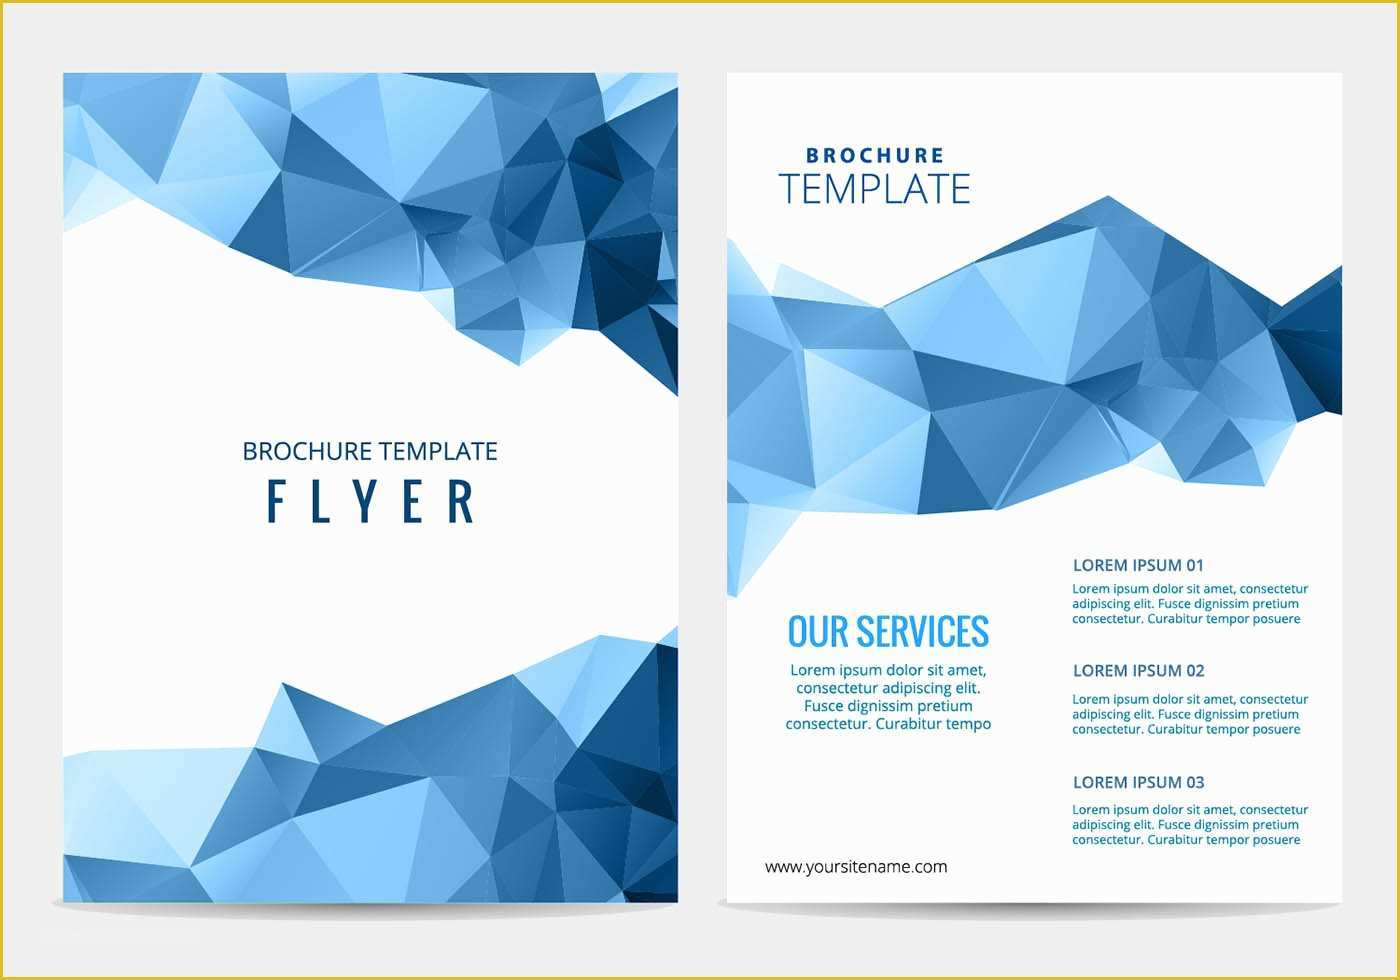 Free Pages Flyer Templates Of Vector Business Brochure Download Free Vector Art Stock